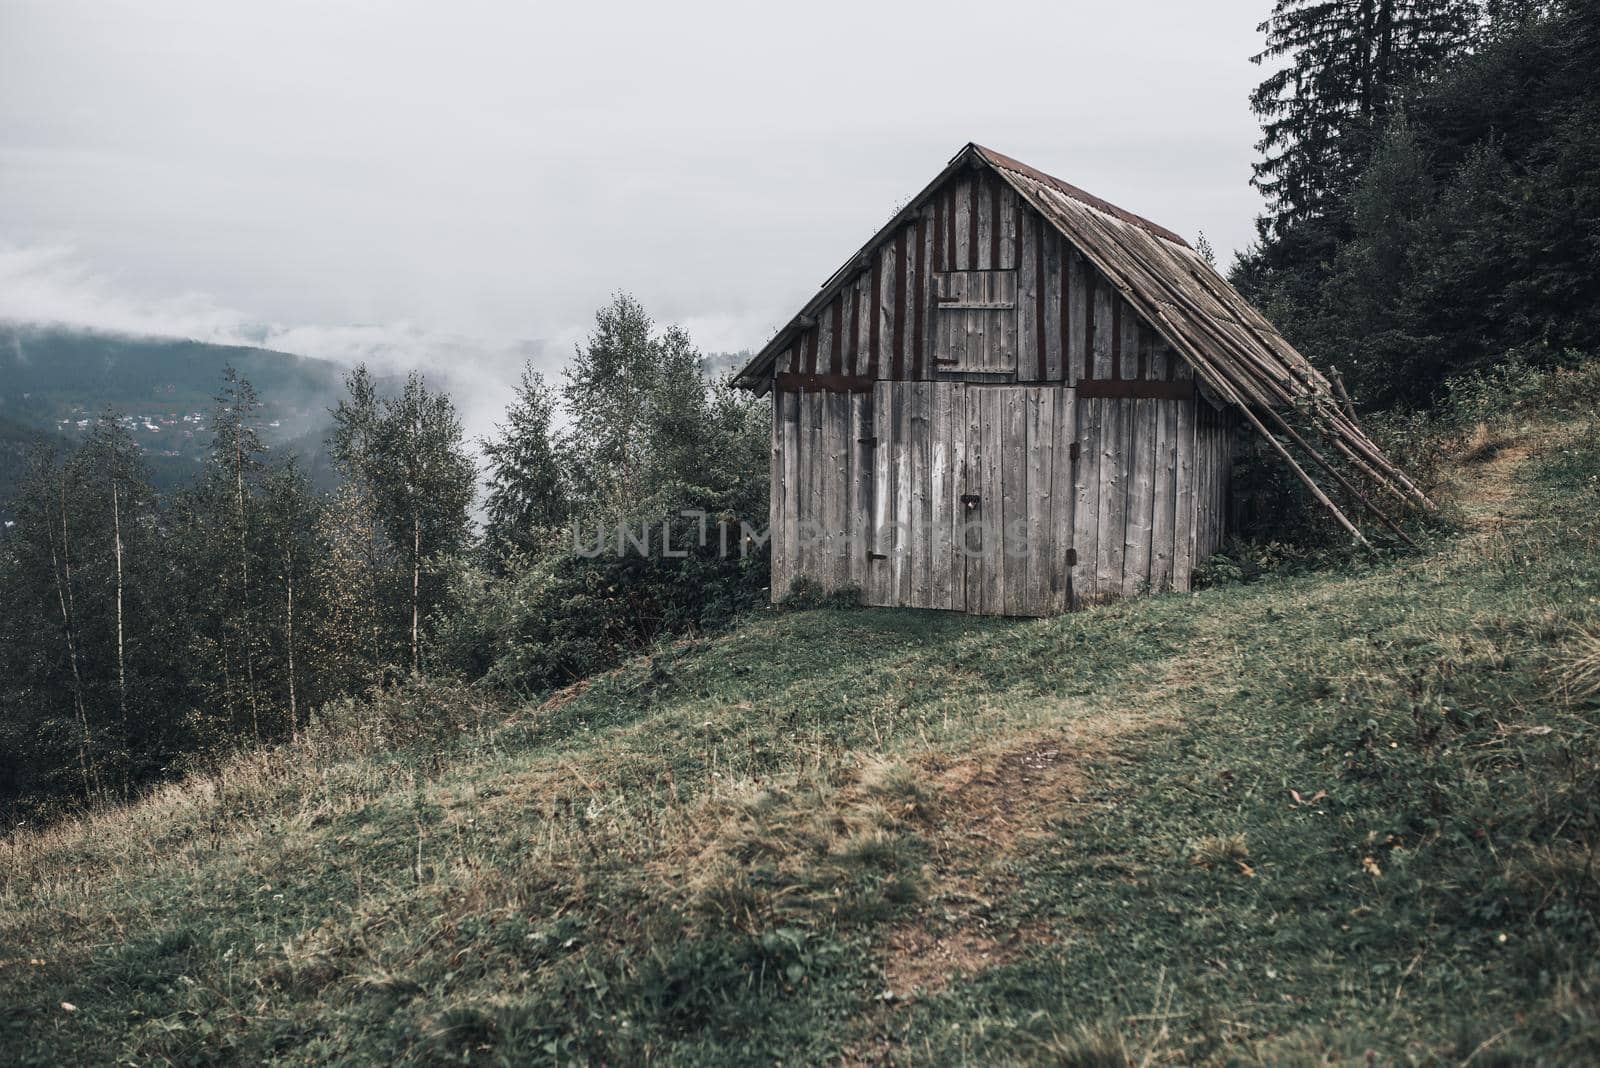 gray wooden house with boards in the Carpathian mountains. Yaremche. The most beautiful places in Ukraine. Tall spruce. fog over the forest.